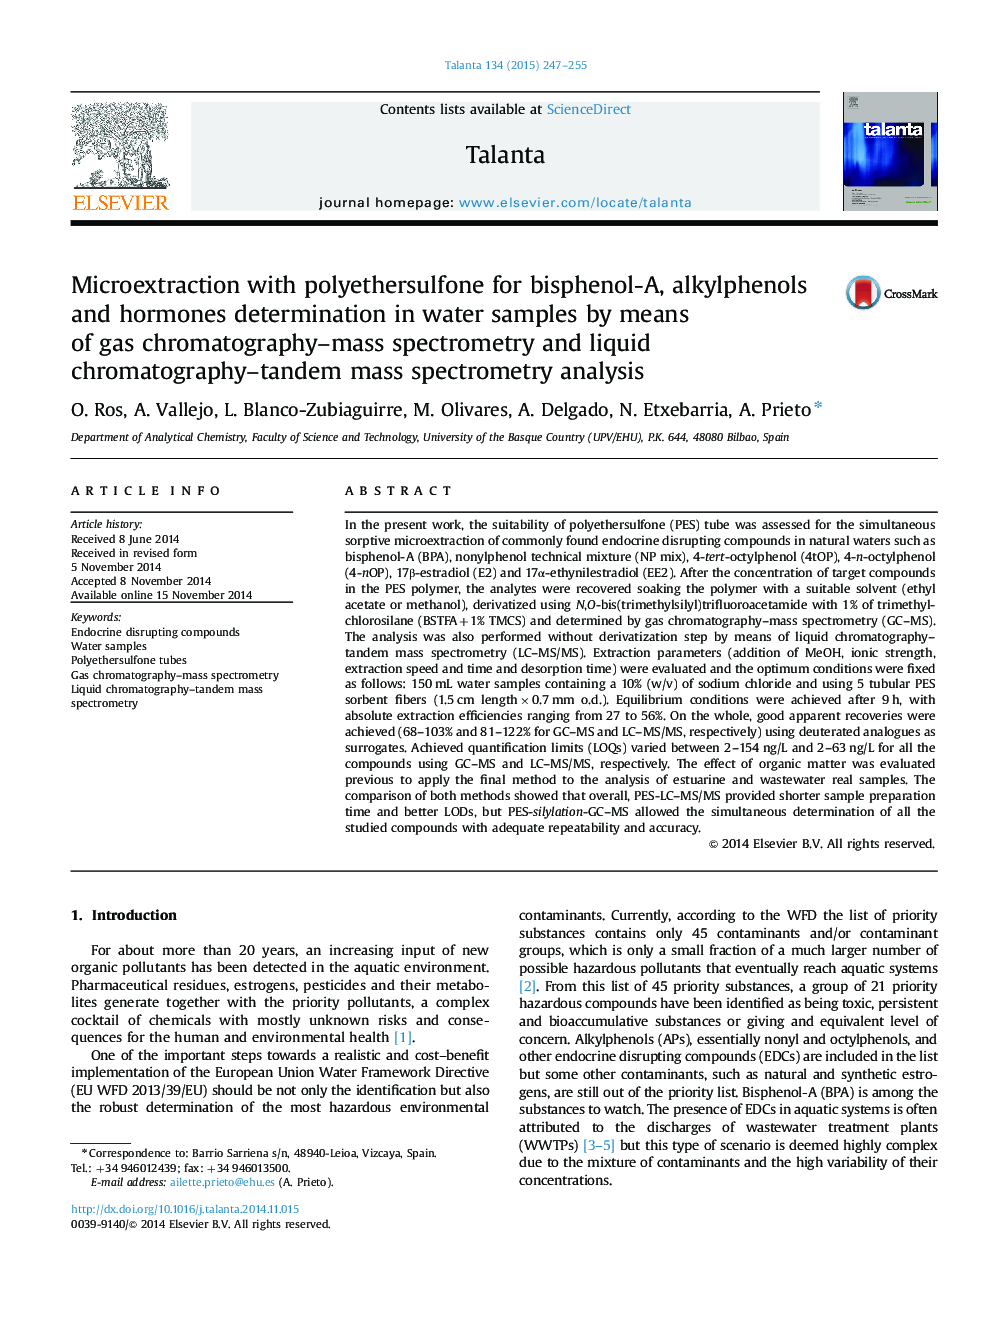 Microextraction with polyethersulfone for bisphenol-A, alkylphenols and hormones determination in water samples by means of gas chromatography–mass spectrometry and liquid chromatography–tandem mass spectrometry analysis